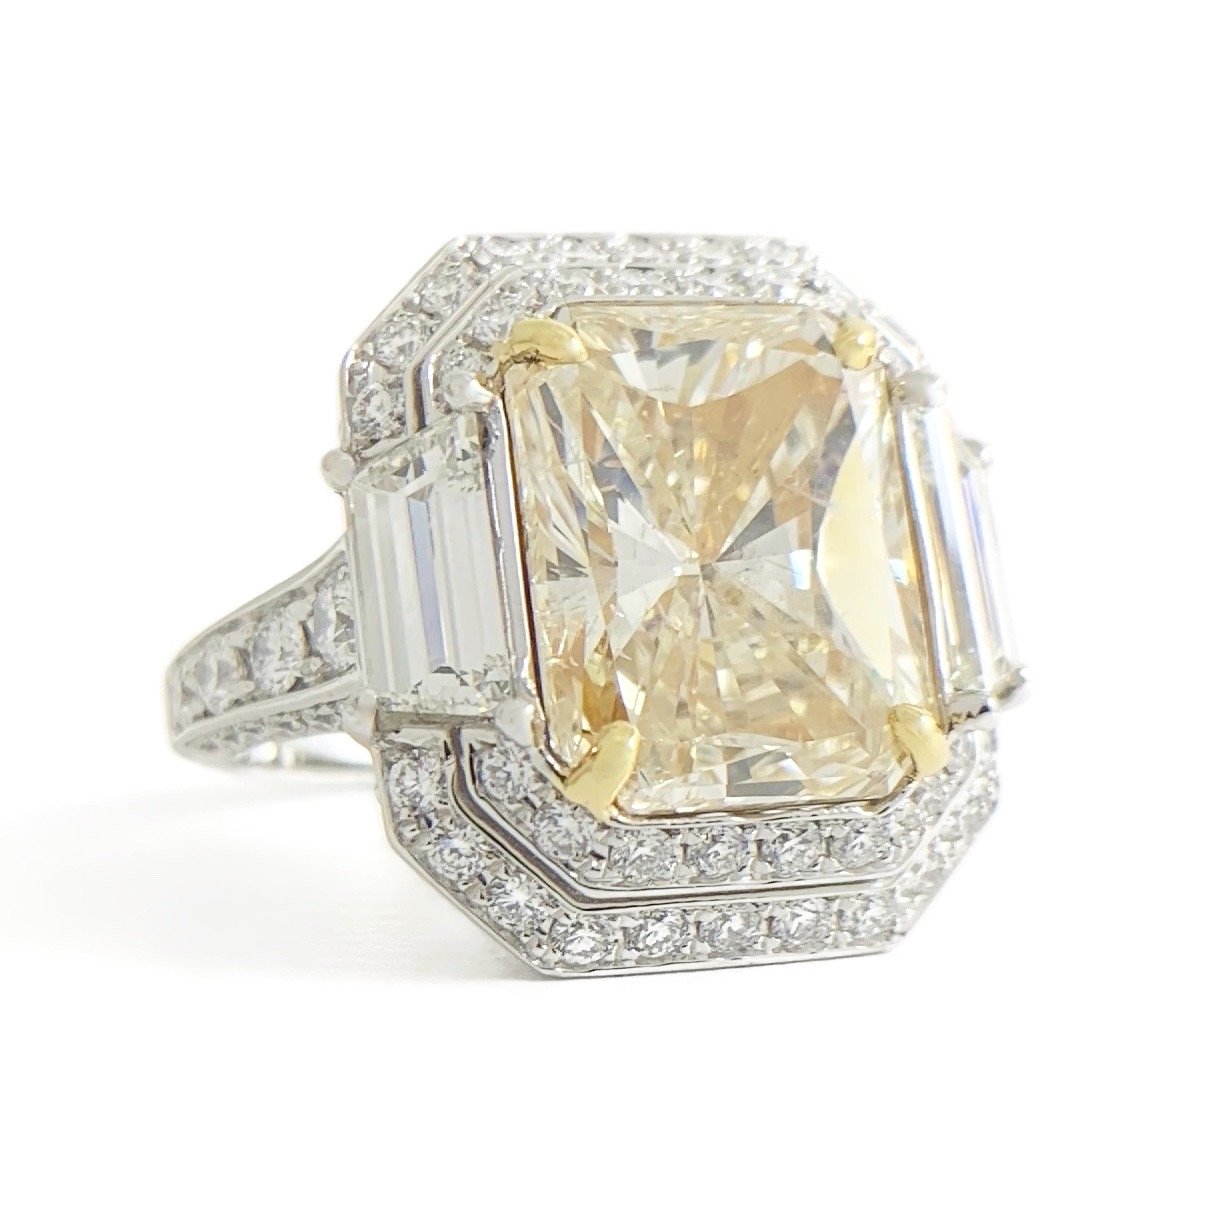 Yellow Diamond Engagement Rings: The Complete Guide